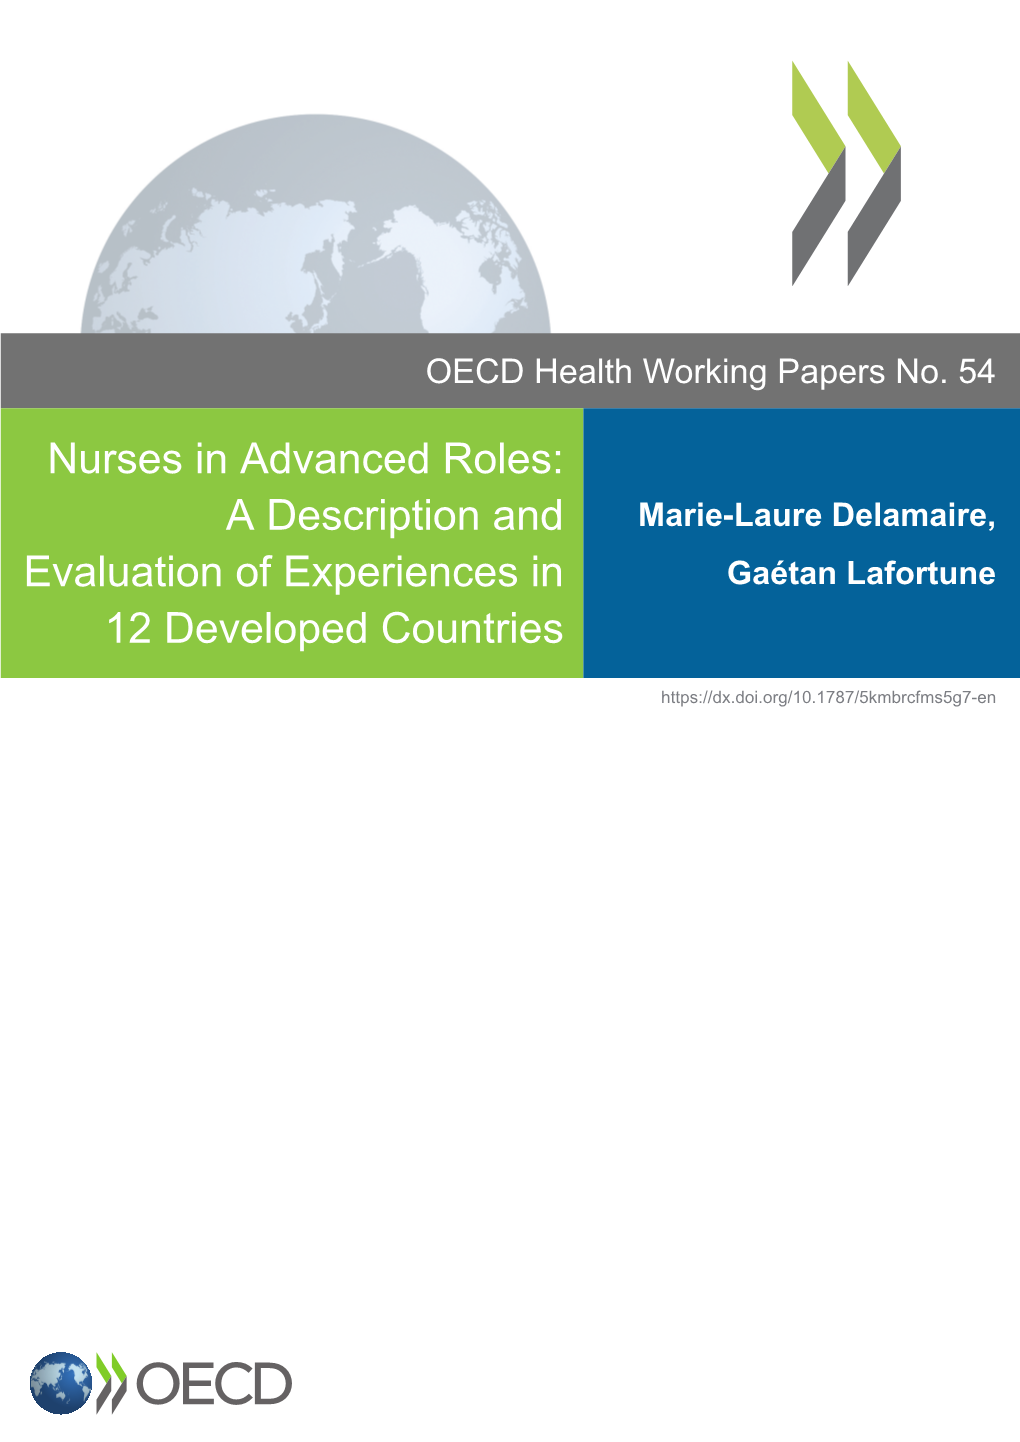 Nurses in Advanced Roles: a Description and Evaluation of Experiences in 12 Developed Countries